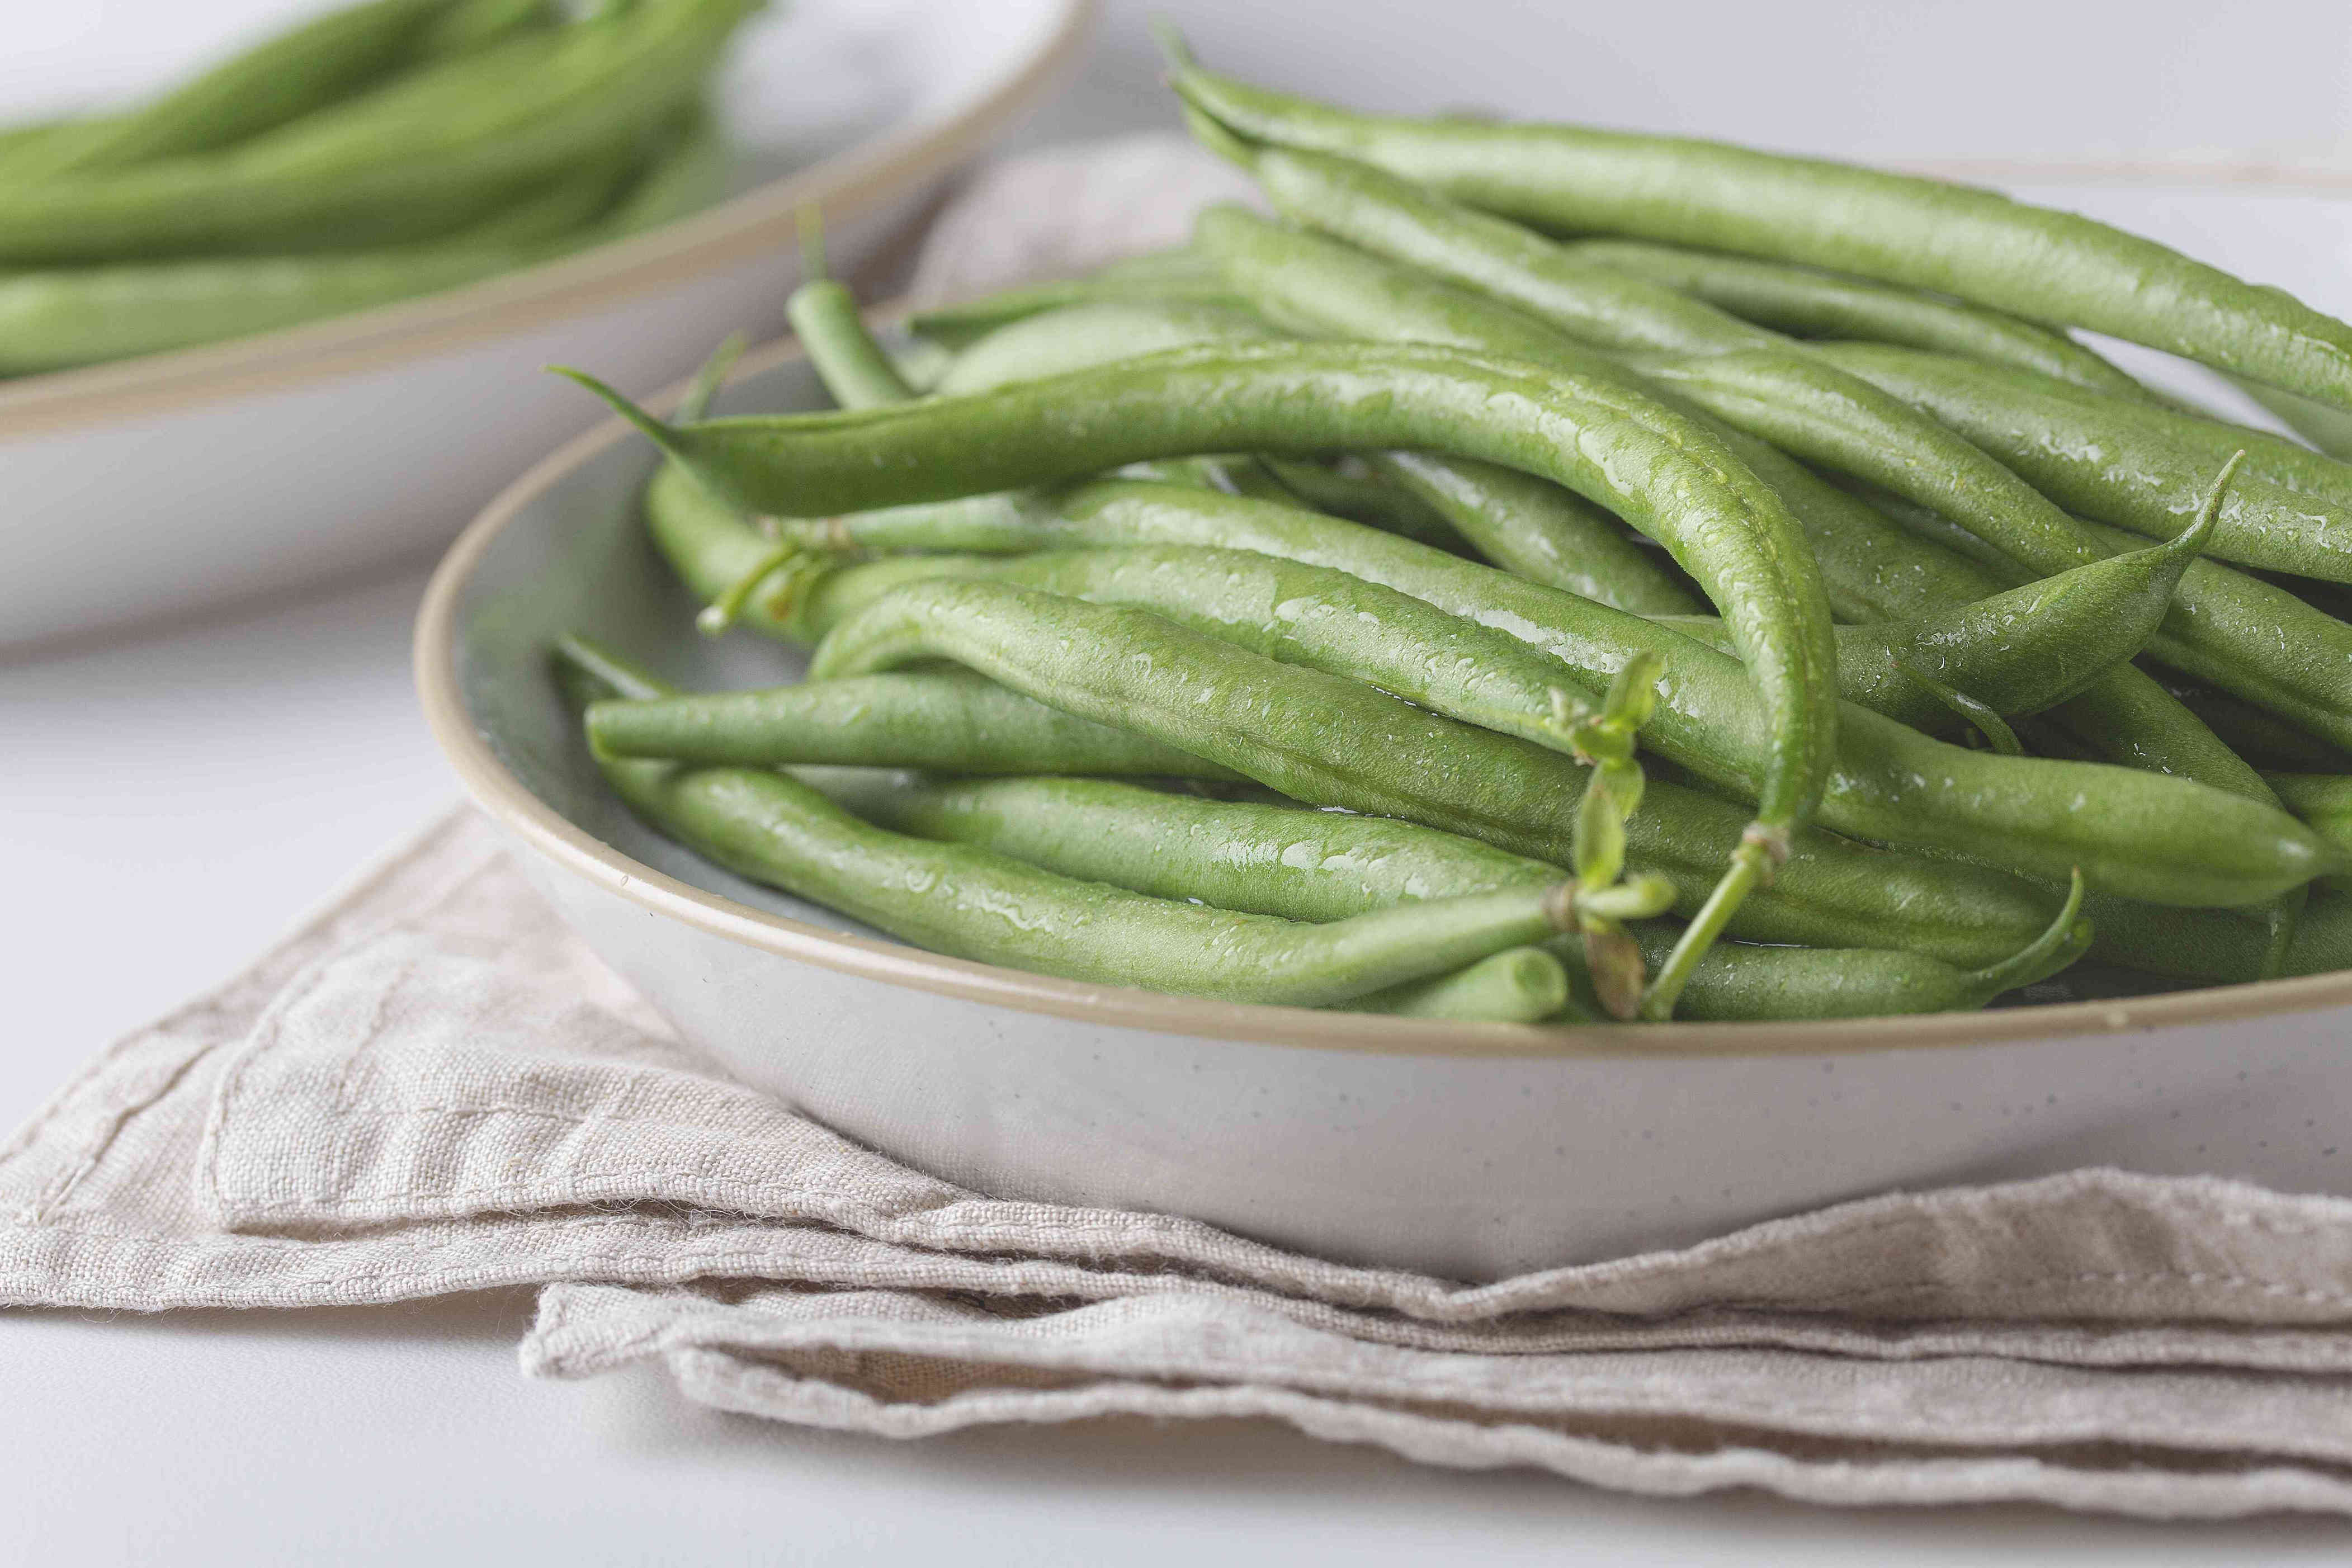 Can You Eat Raw Green Beans?